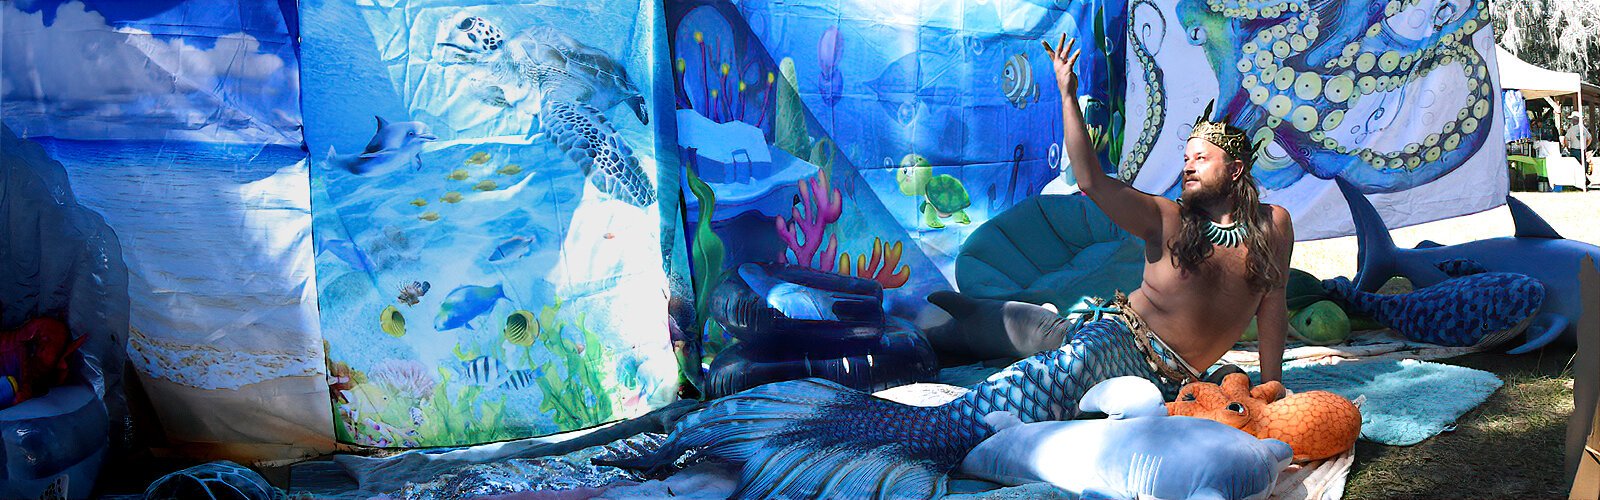 Aiden the Merman, a Tampa Bay dedicated seabird rescuer and avid diver, adds a touch of sweet fiction at the Wonders of Wildlife Festival by posing as a merman in the mermaid section. 